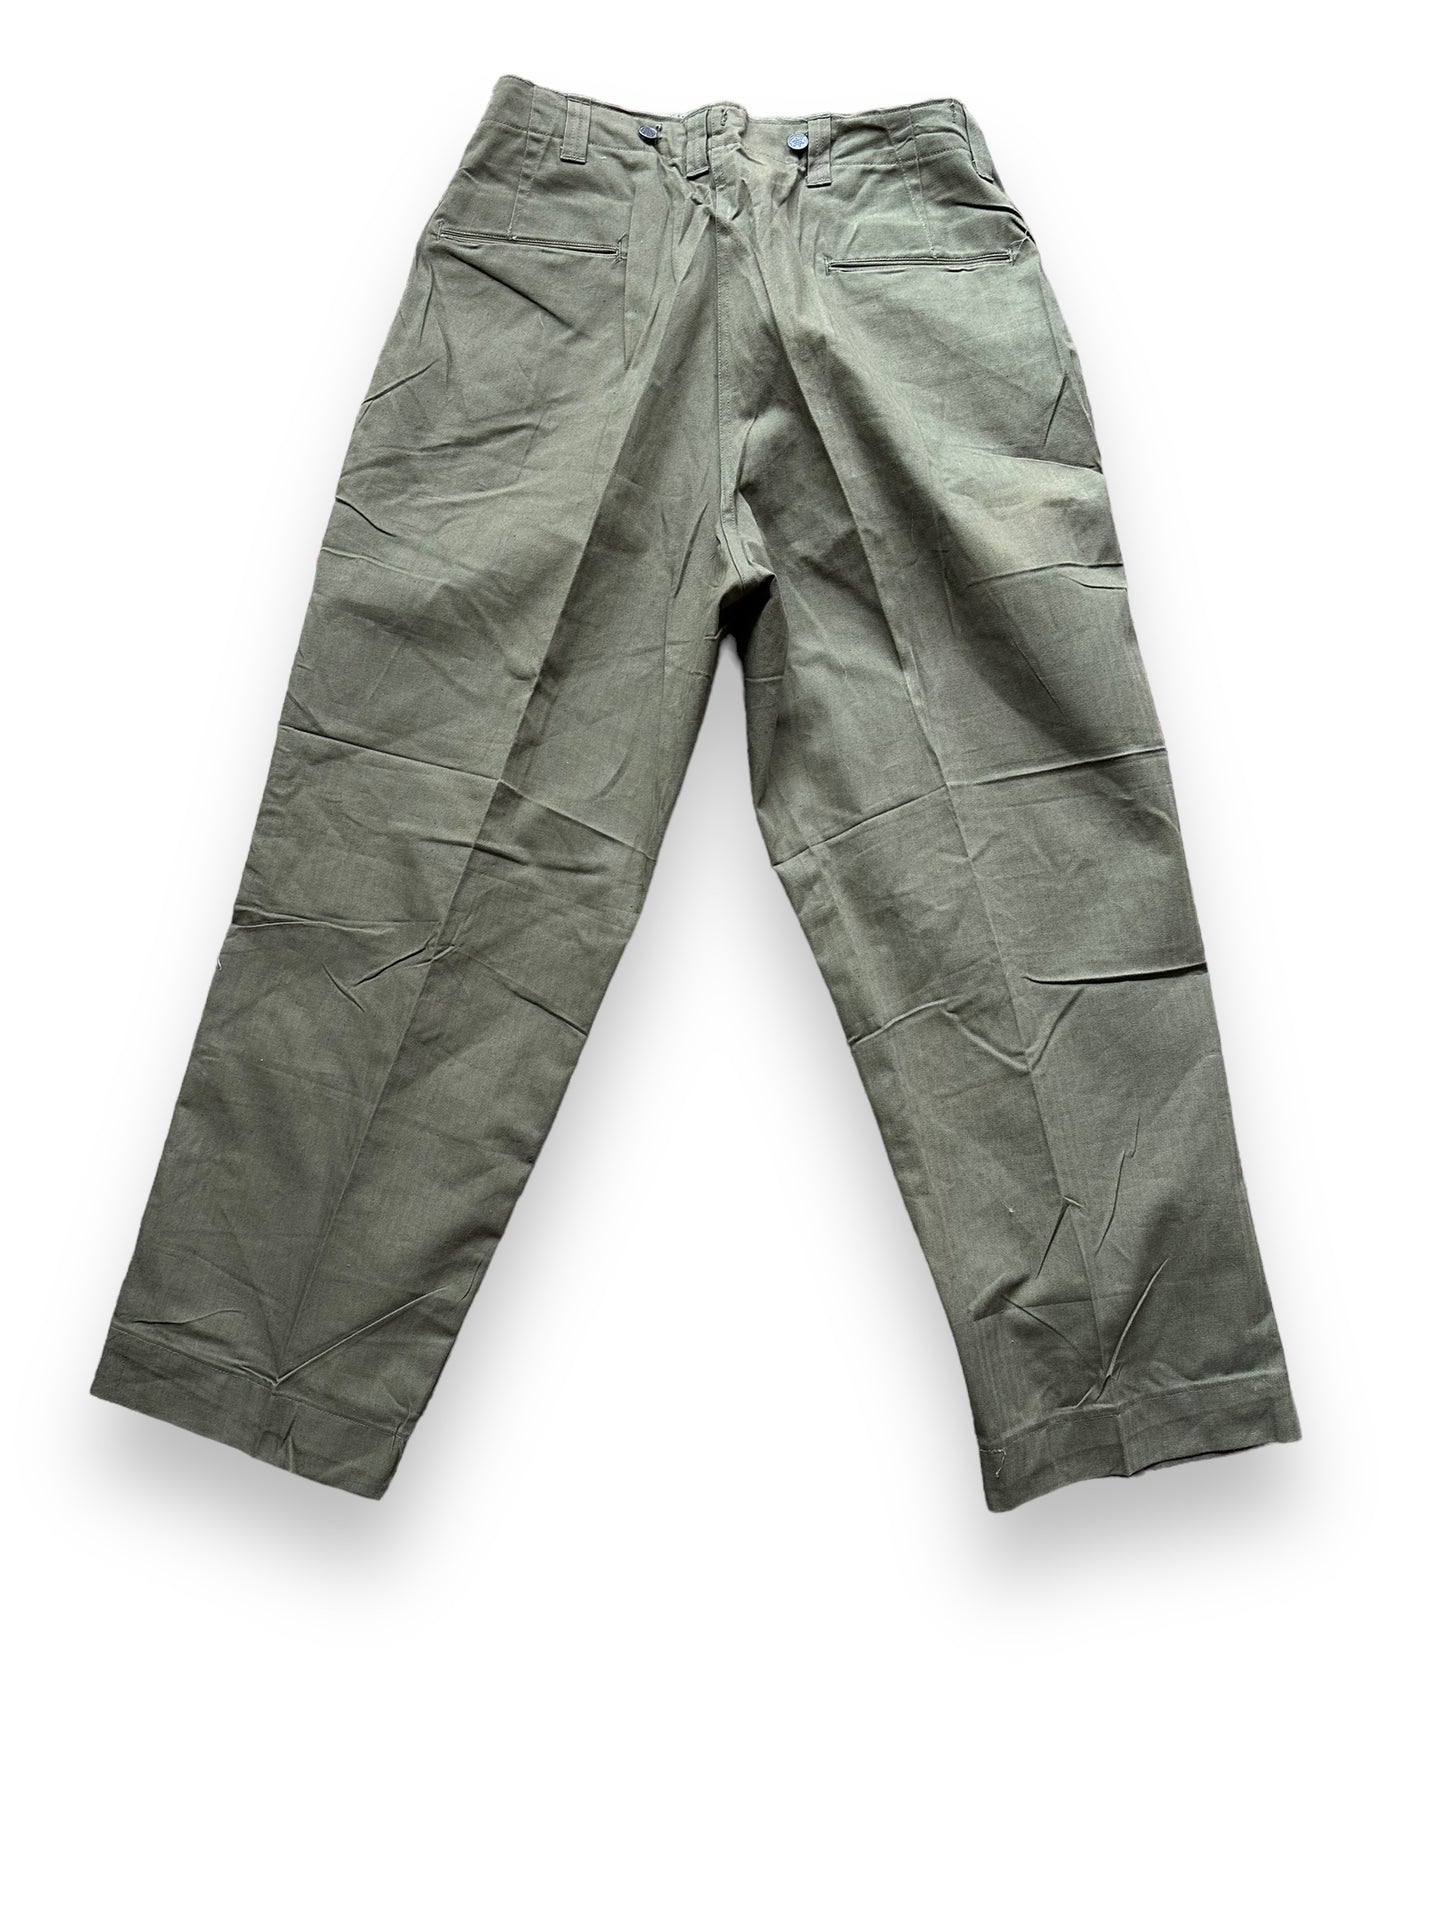 Rear View of Vintage WWII M-43 HBT Field Cotton Trousers Olive Drab W34 | Barn Owl Vintage Seattle | Vintage Military Trousers Seattle